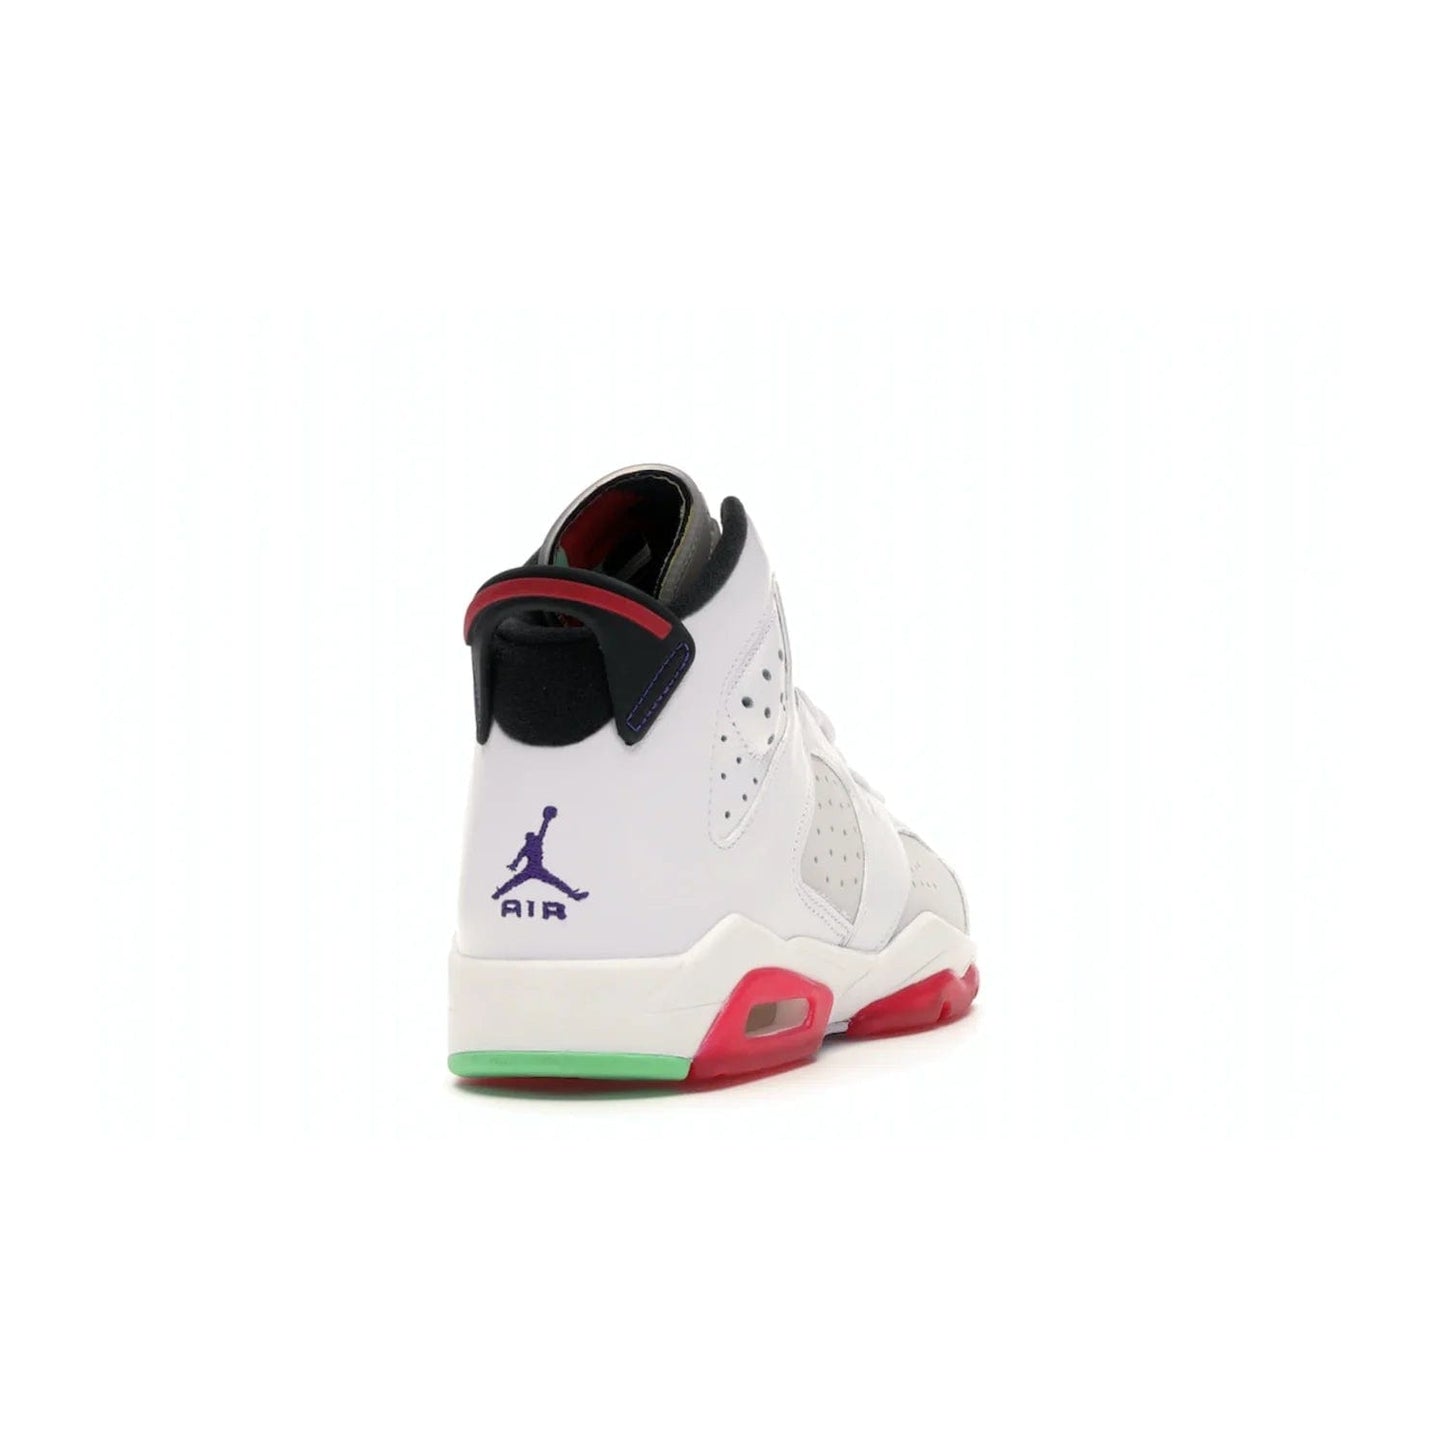 Jordan 6 Retro Hare (GS) - Image 30 - Only at www.BallersClubKickz.com - The Air Jordan 6 Hare GS. Comfortable suede upper, perforations, red pods, two-tone midsole, and signature "Jumpman" emblem. Released 17 June 2020. Perfect for any sneakerhead.